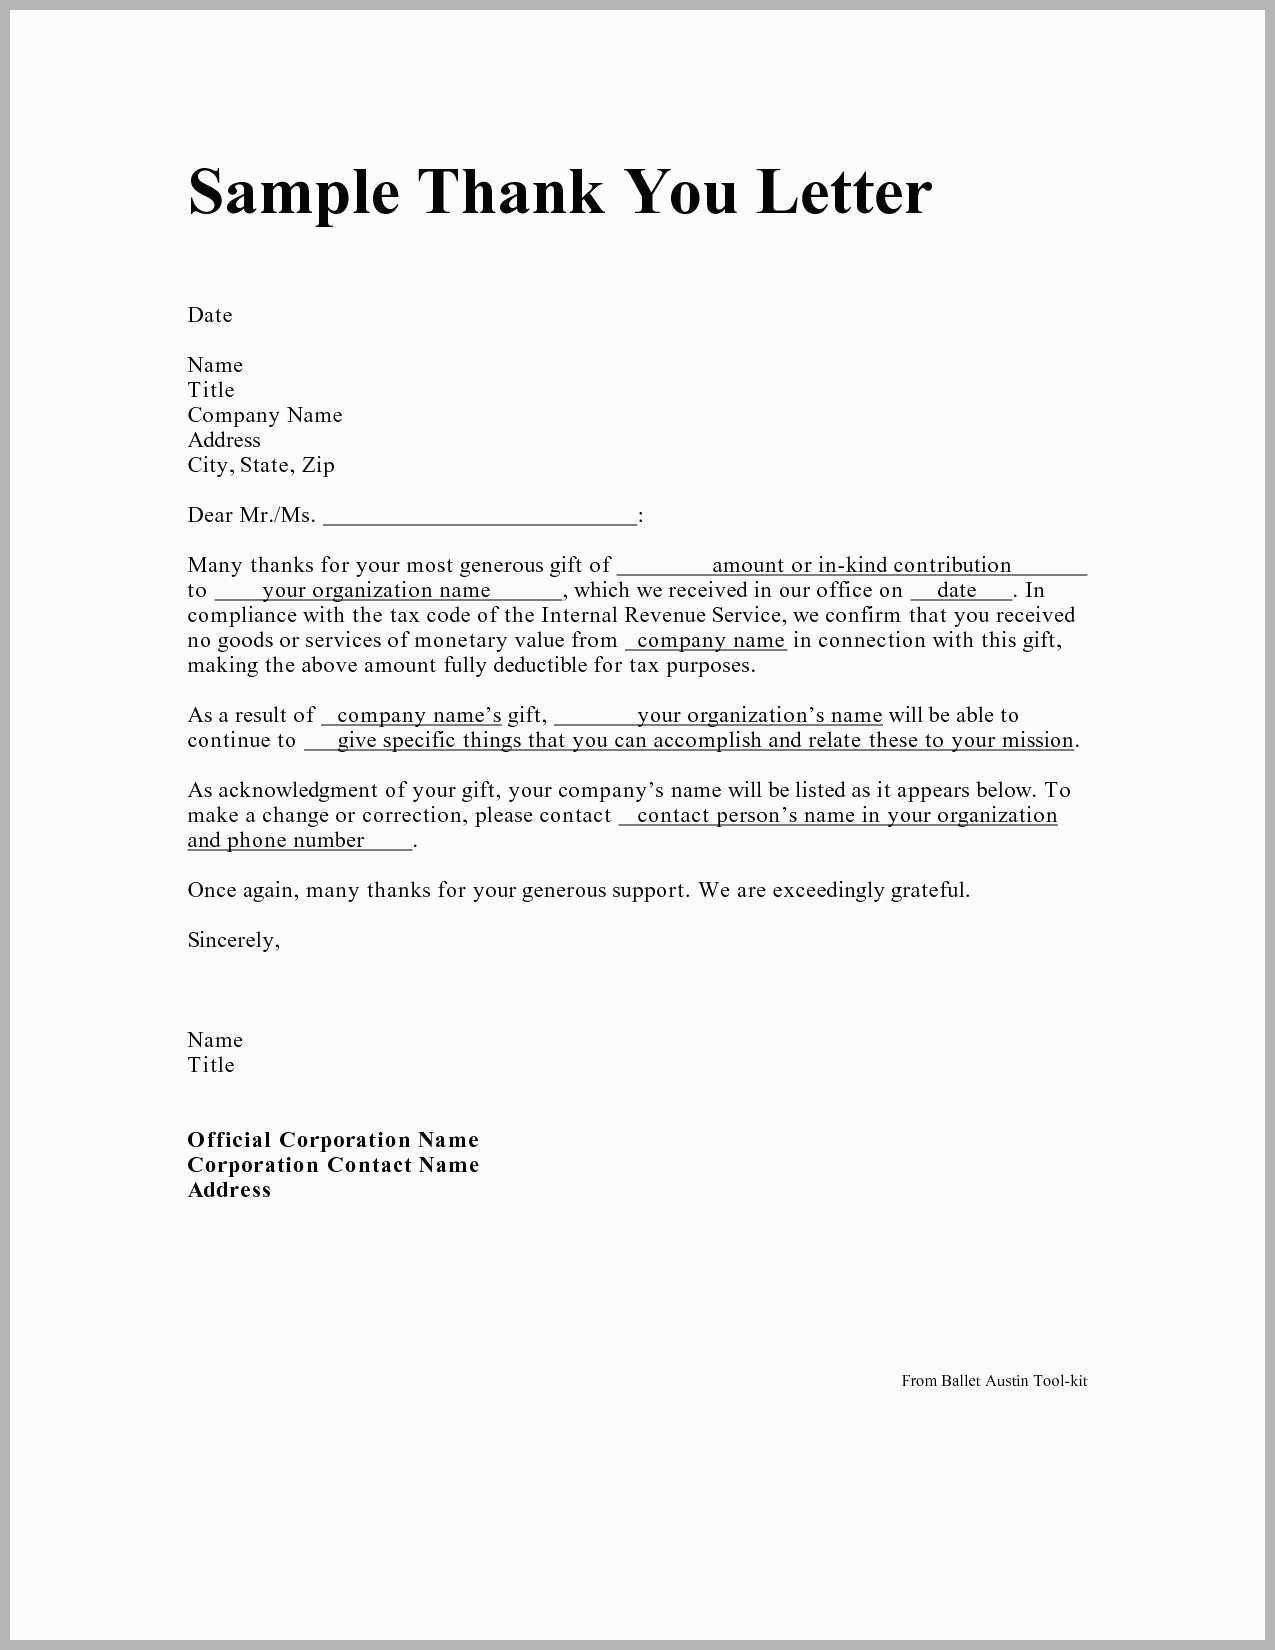 Fundraising Thank You Letter How to Write A Donation Letter In Memory someone